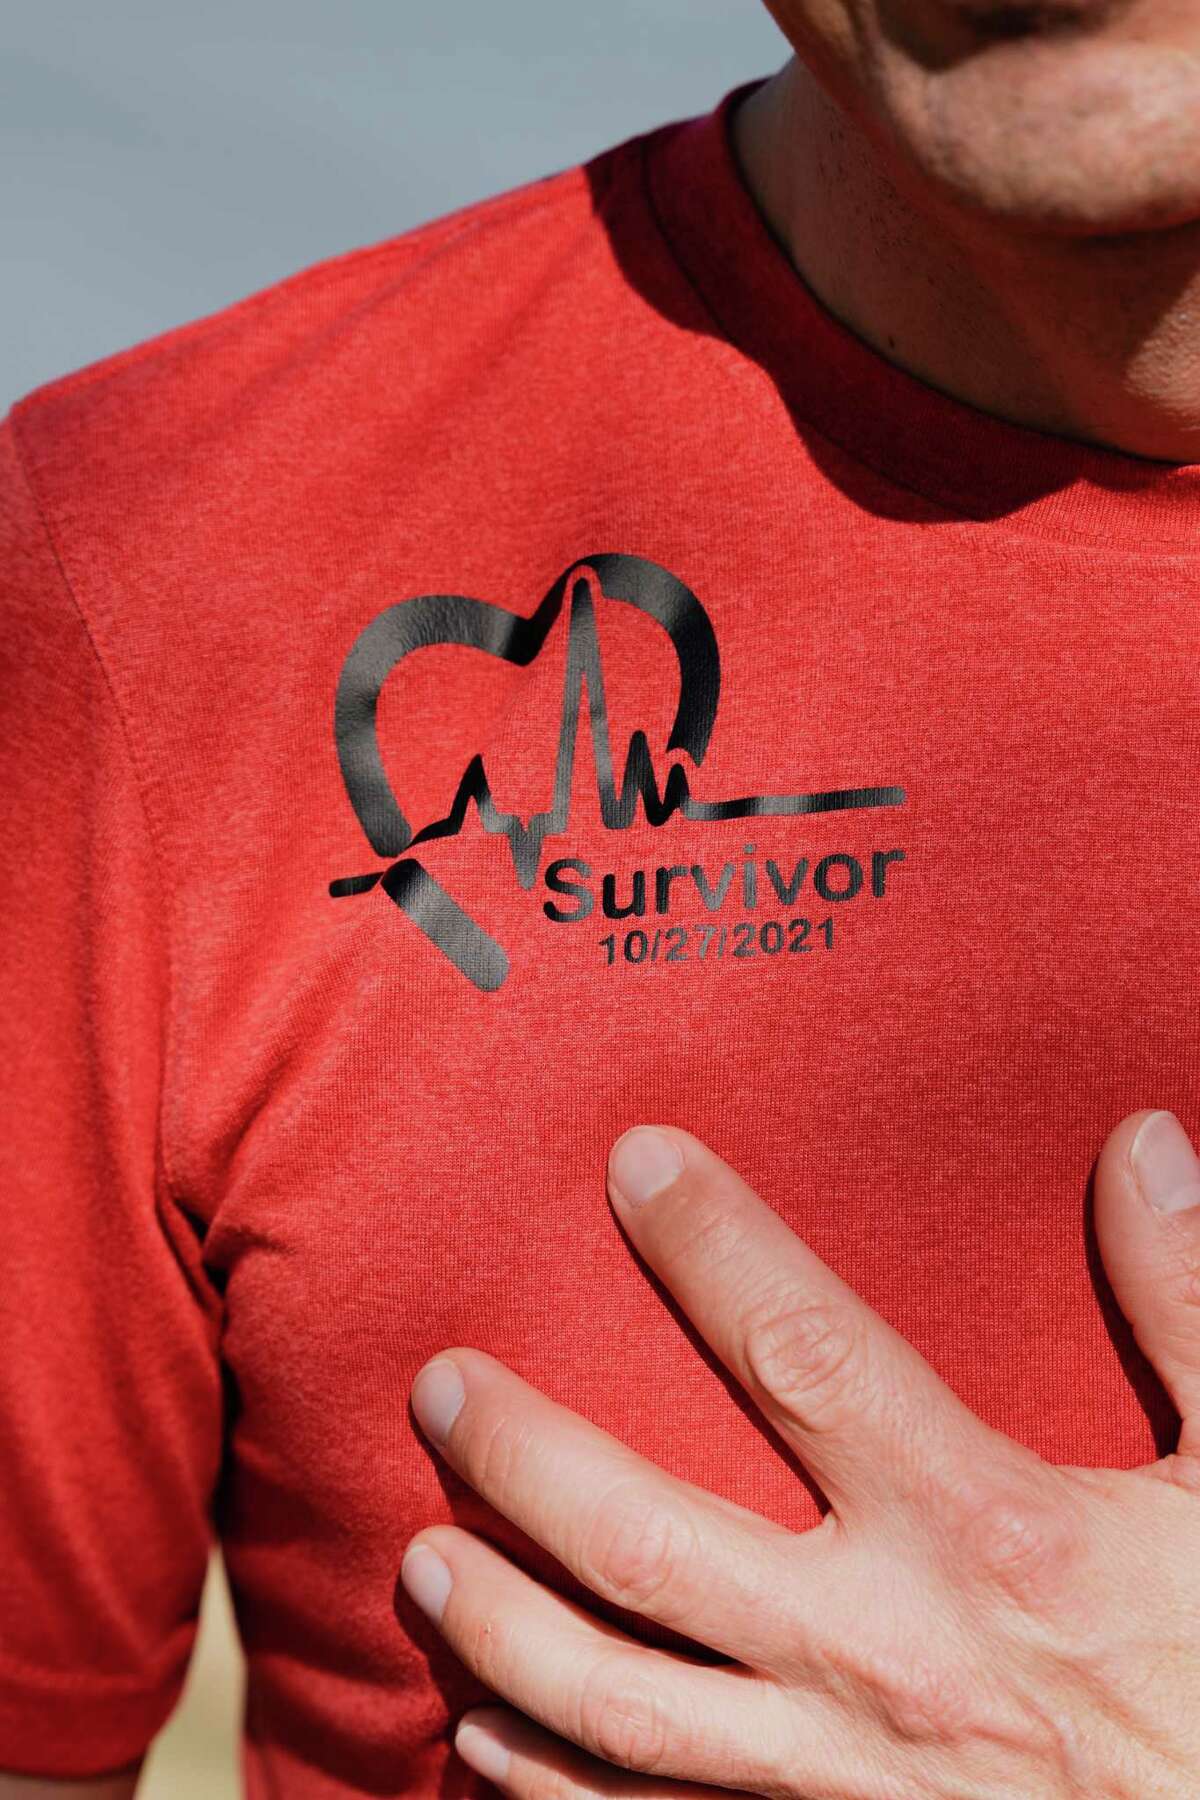 Esau Velazquez shows off his shirt, “Survivor, 10/27/2021” in Houston, Friday, Jan. 6, 2023. Velazquez recently suffered a heart attack last year and has enroll in Memorial Hermann's cardiac rehab program to get back to running.